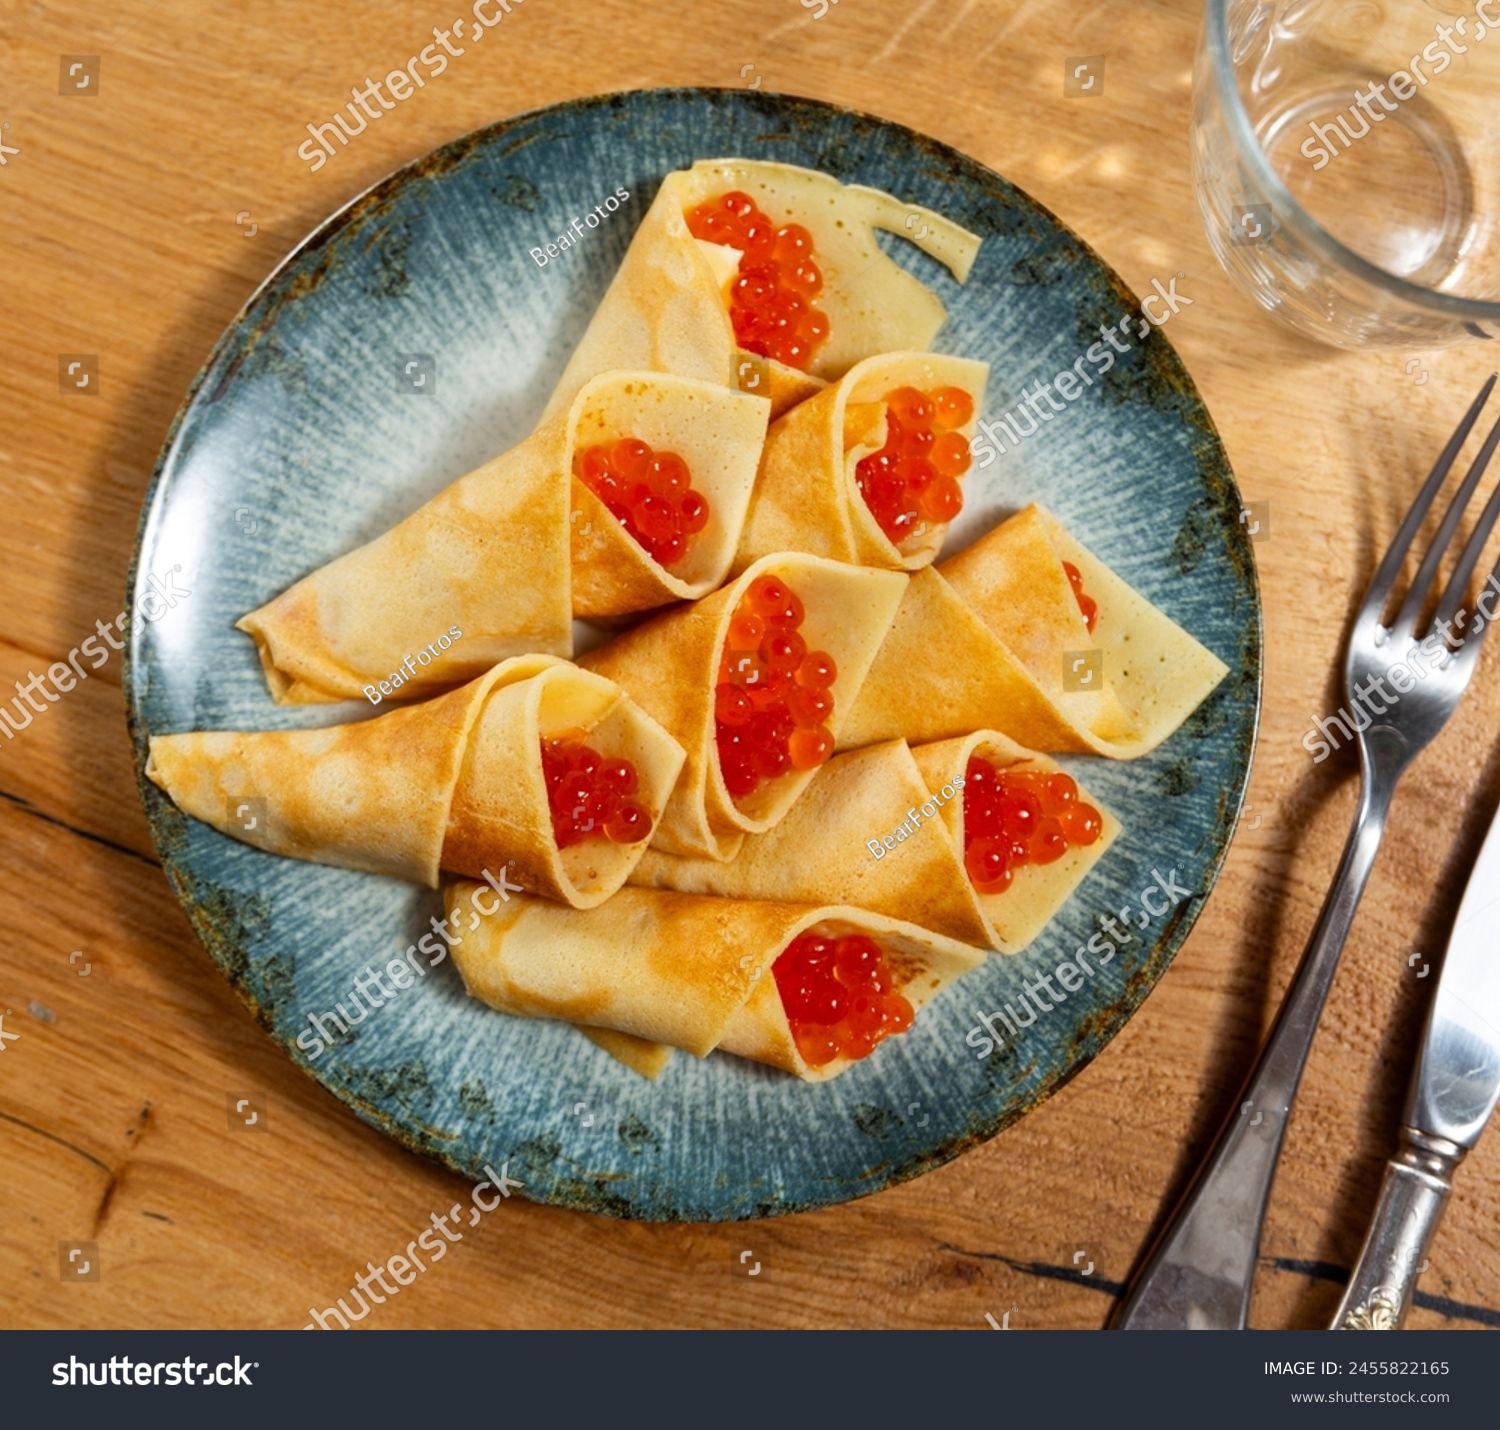 Pancakes with red caviar dished up in flat service plate. Traditional Russian cuisine #2455822165